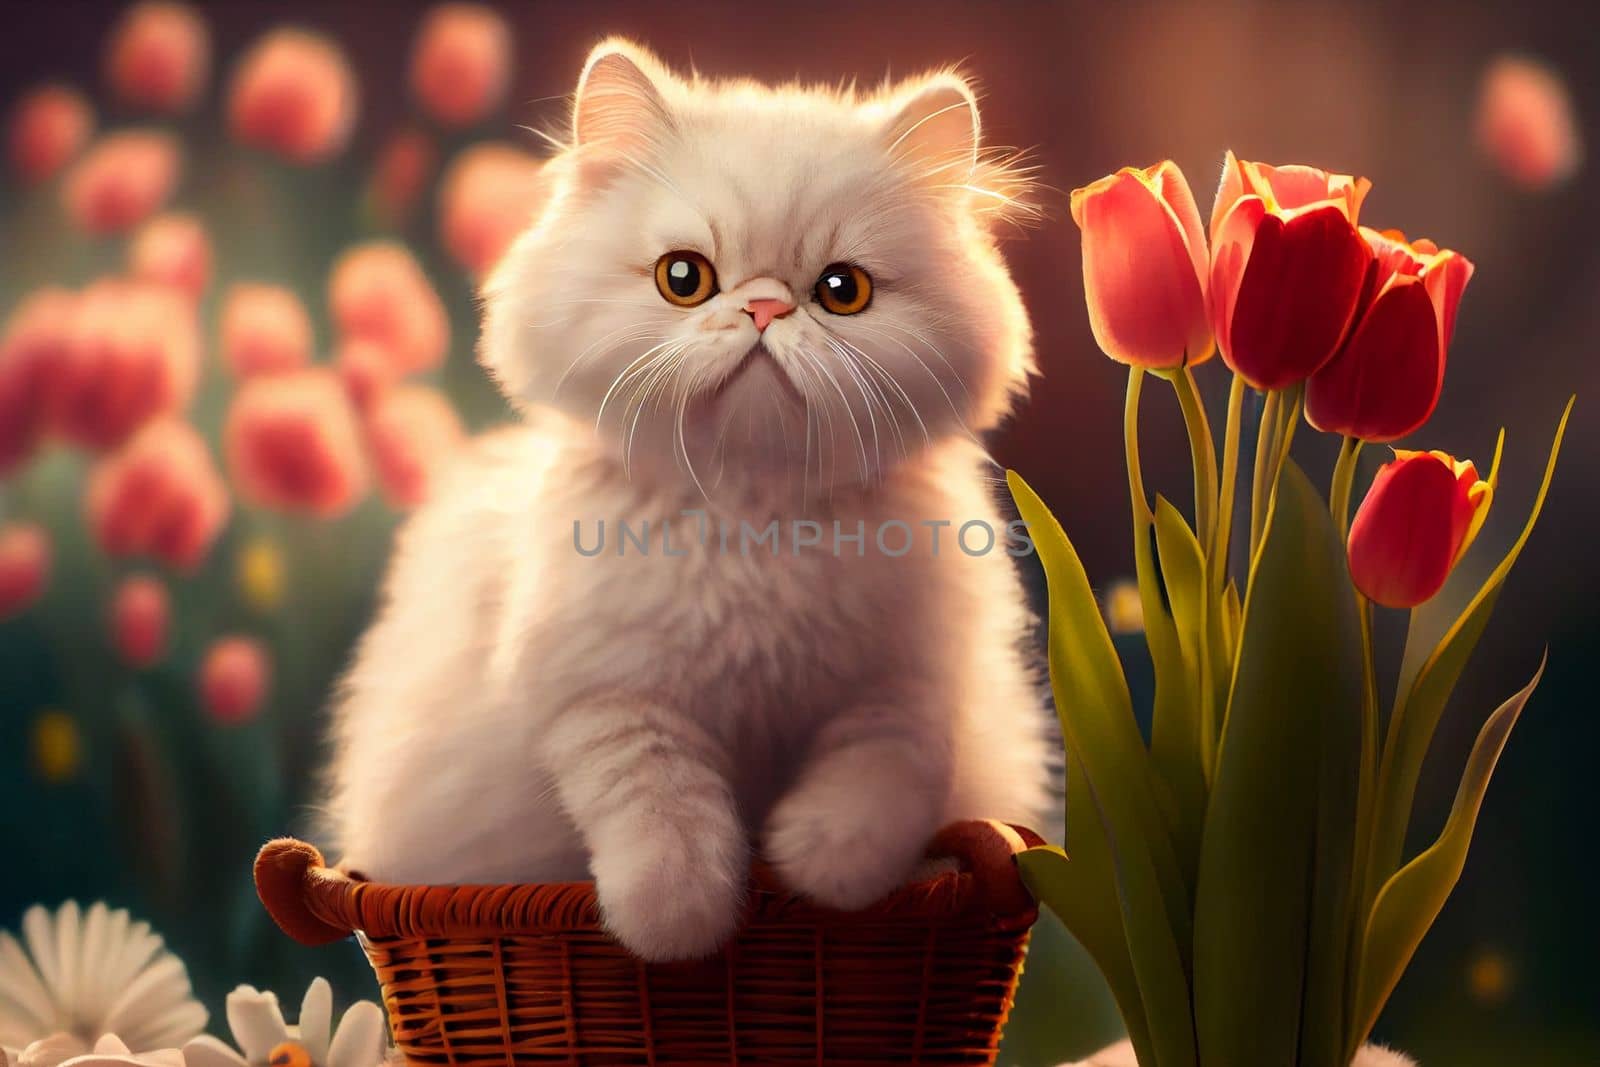 cute white cat in a wicker basket on a background of red tulips in 3k